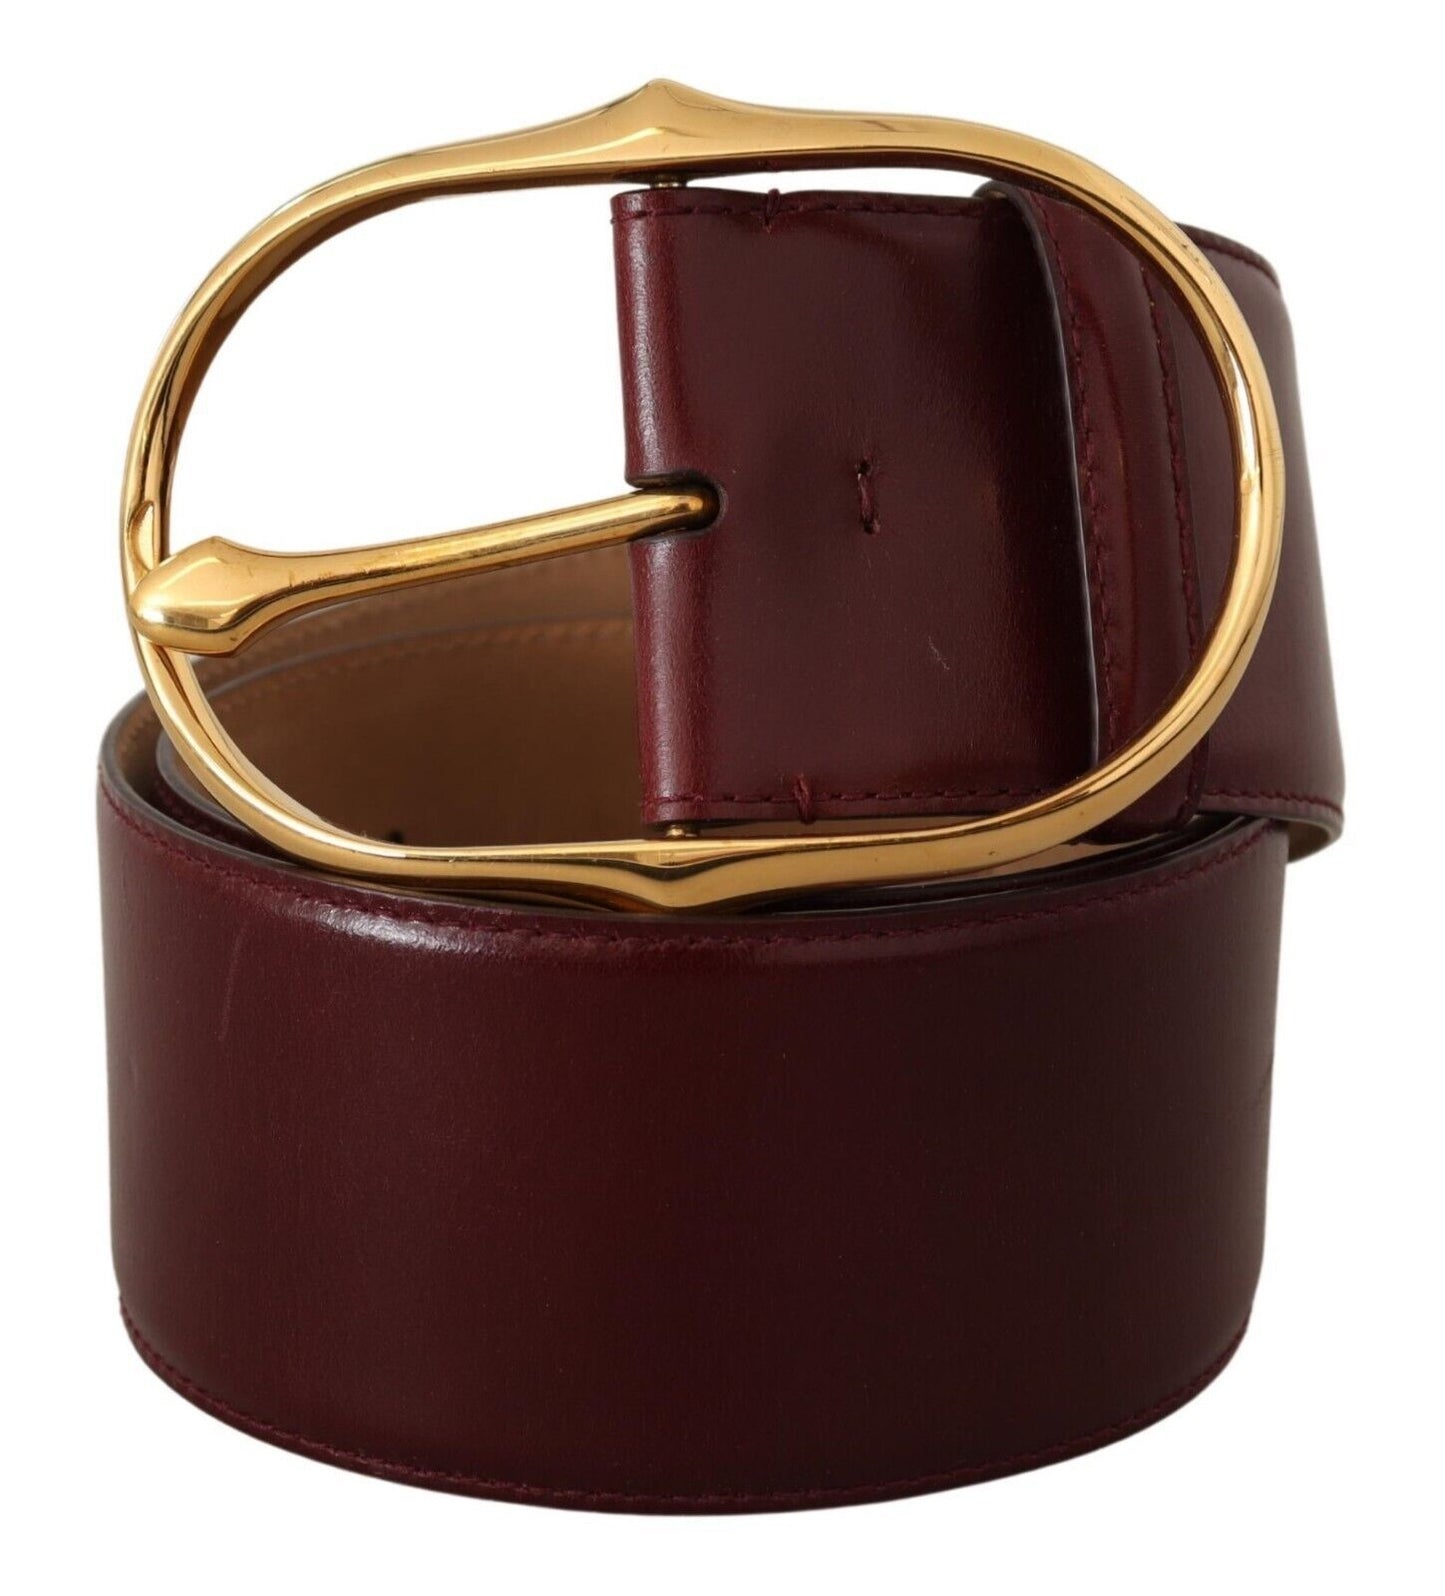 Elegant Brown Leather Belt with Gold Oval Buckle